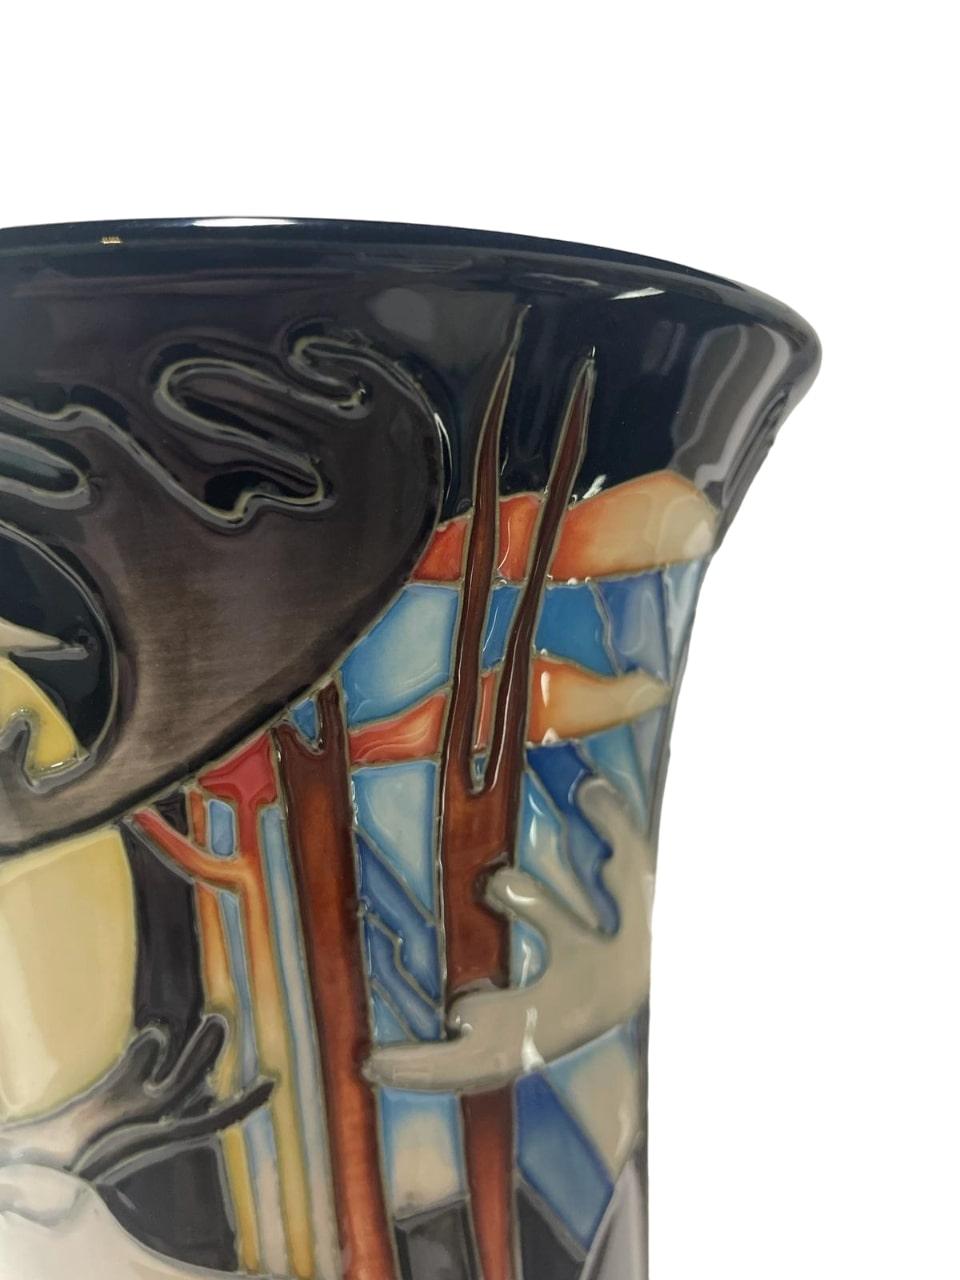 Arts and Crafts LIMITED EDITION MOORCROFT Wapiti vase by Emma Bossons dated 2012 31/35 For Sale